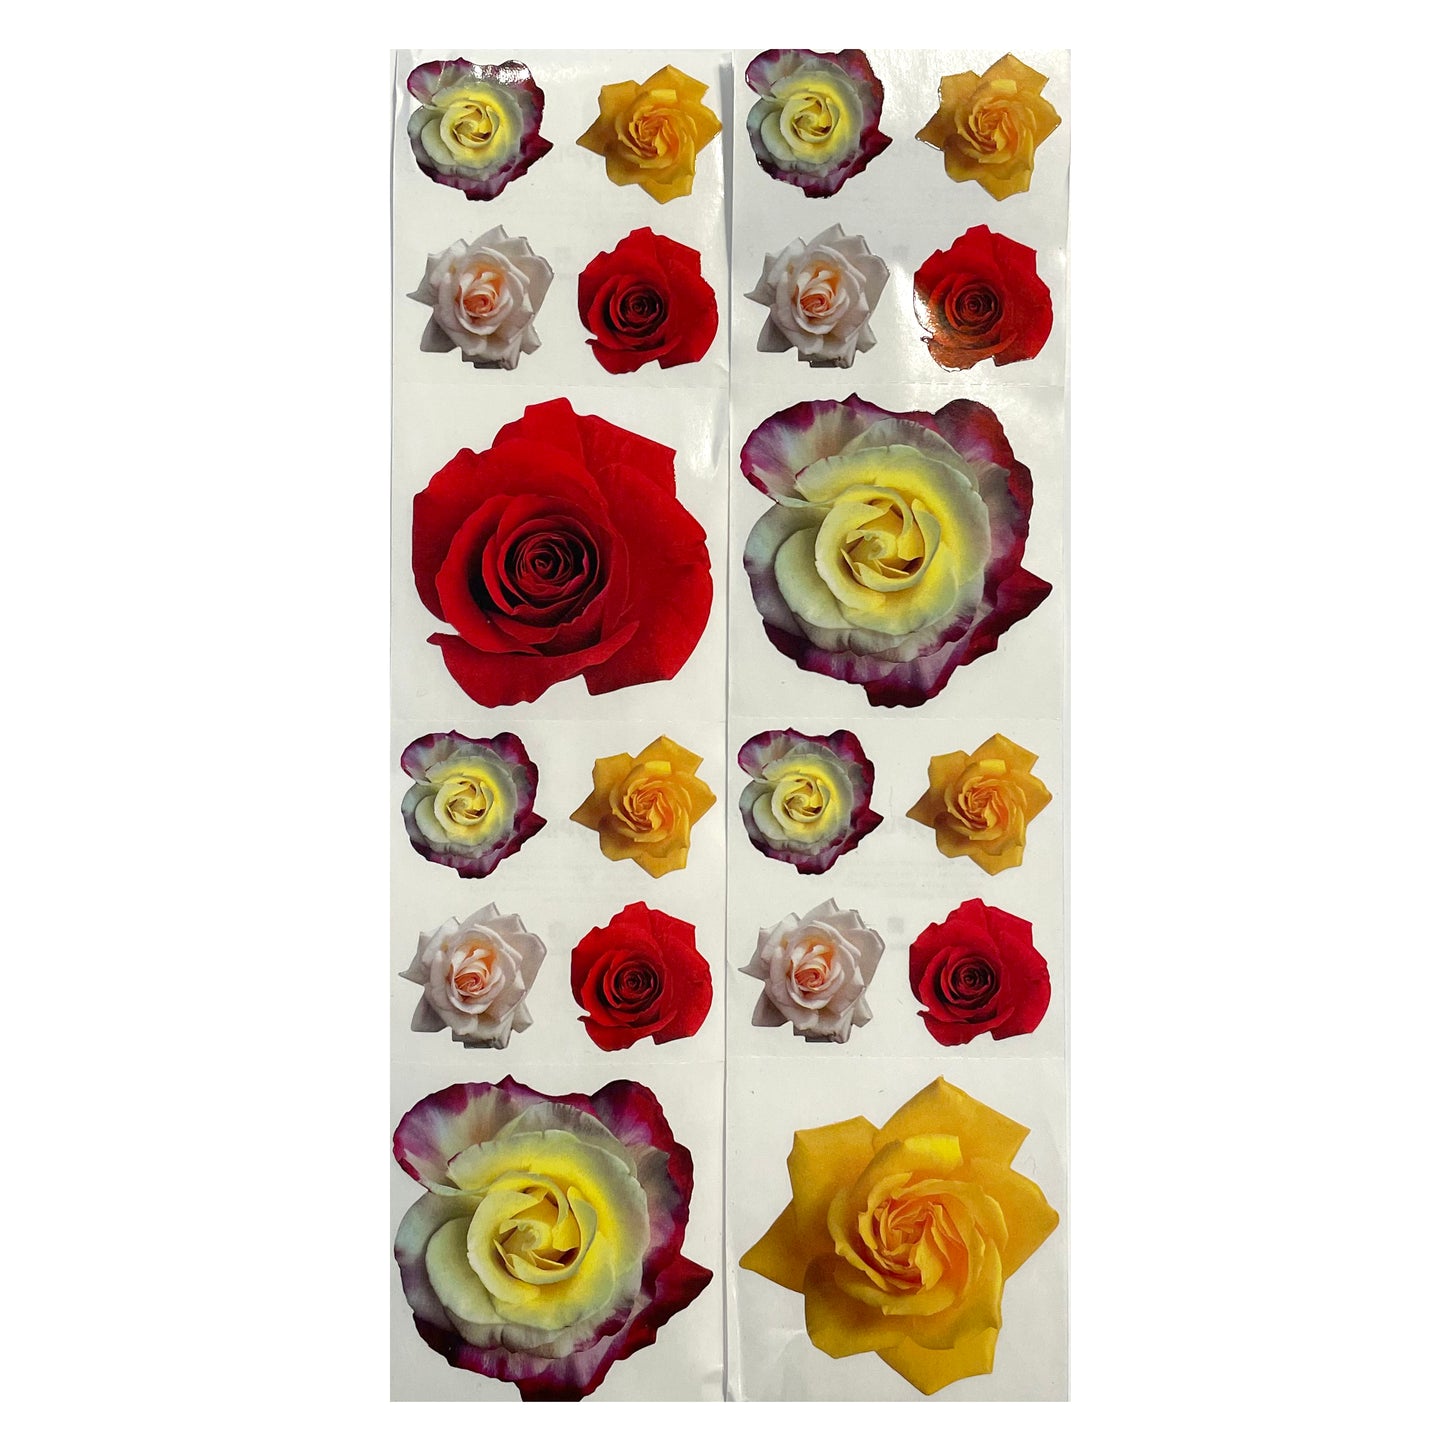 DEALS: 10 Sheets of Colored Rose Stickers